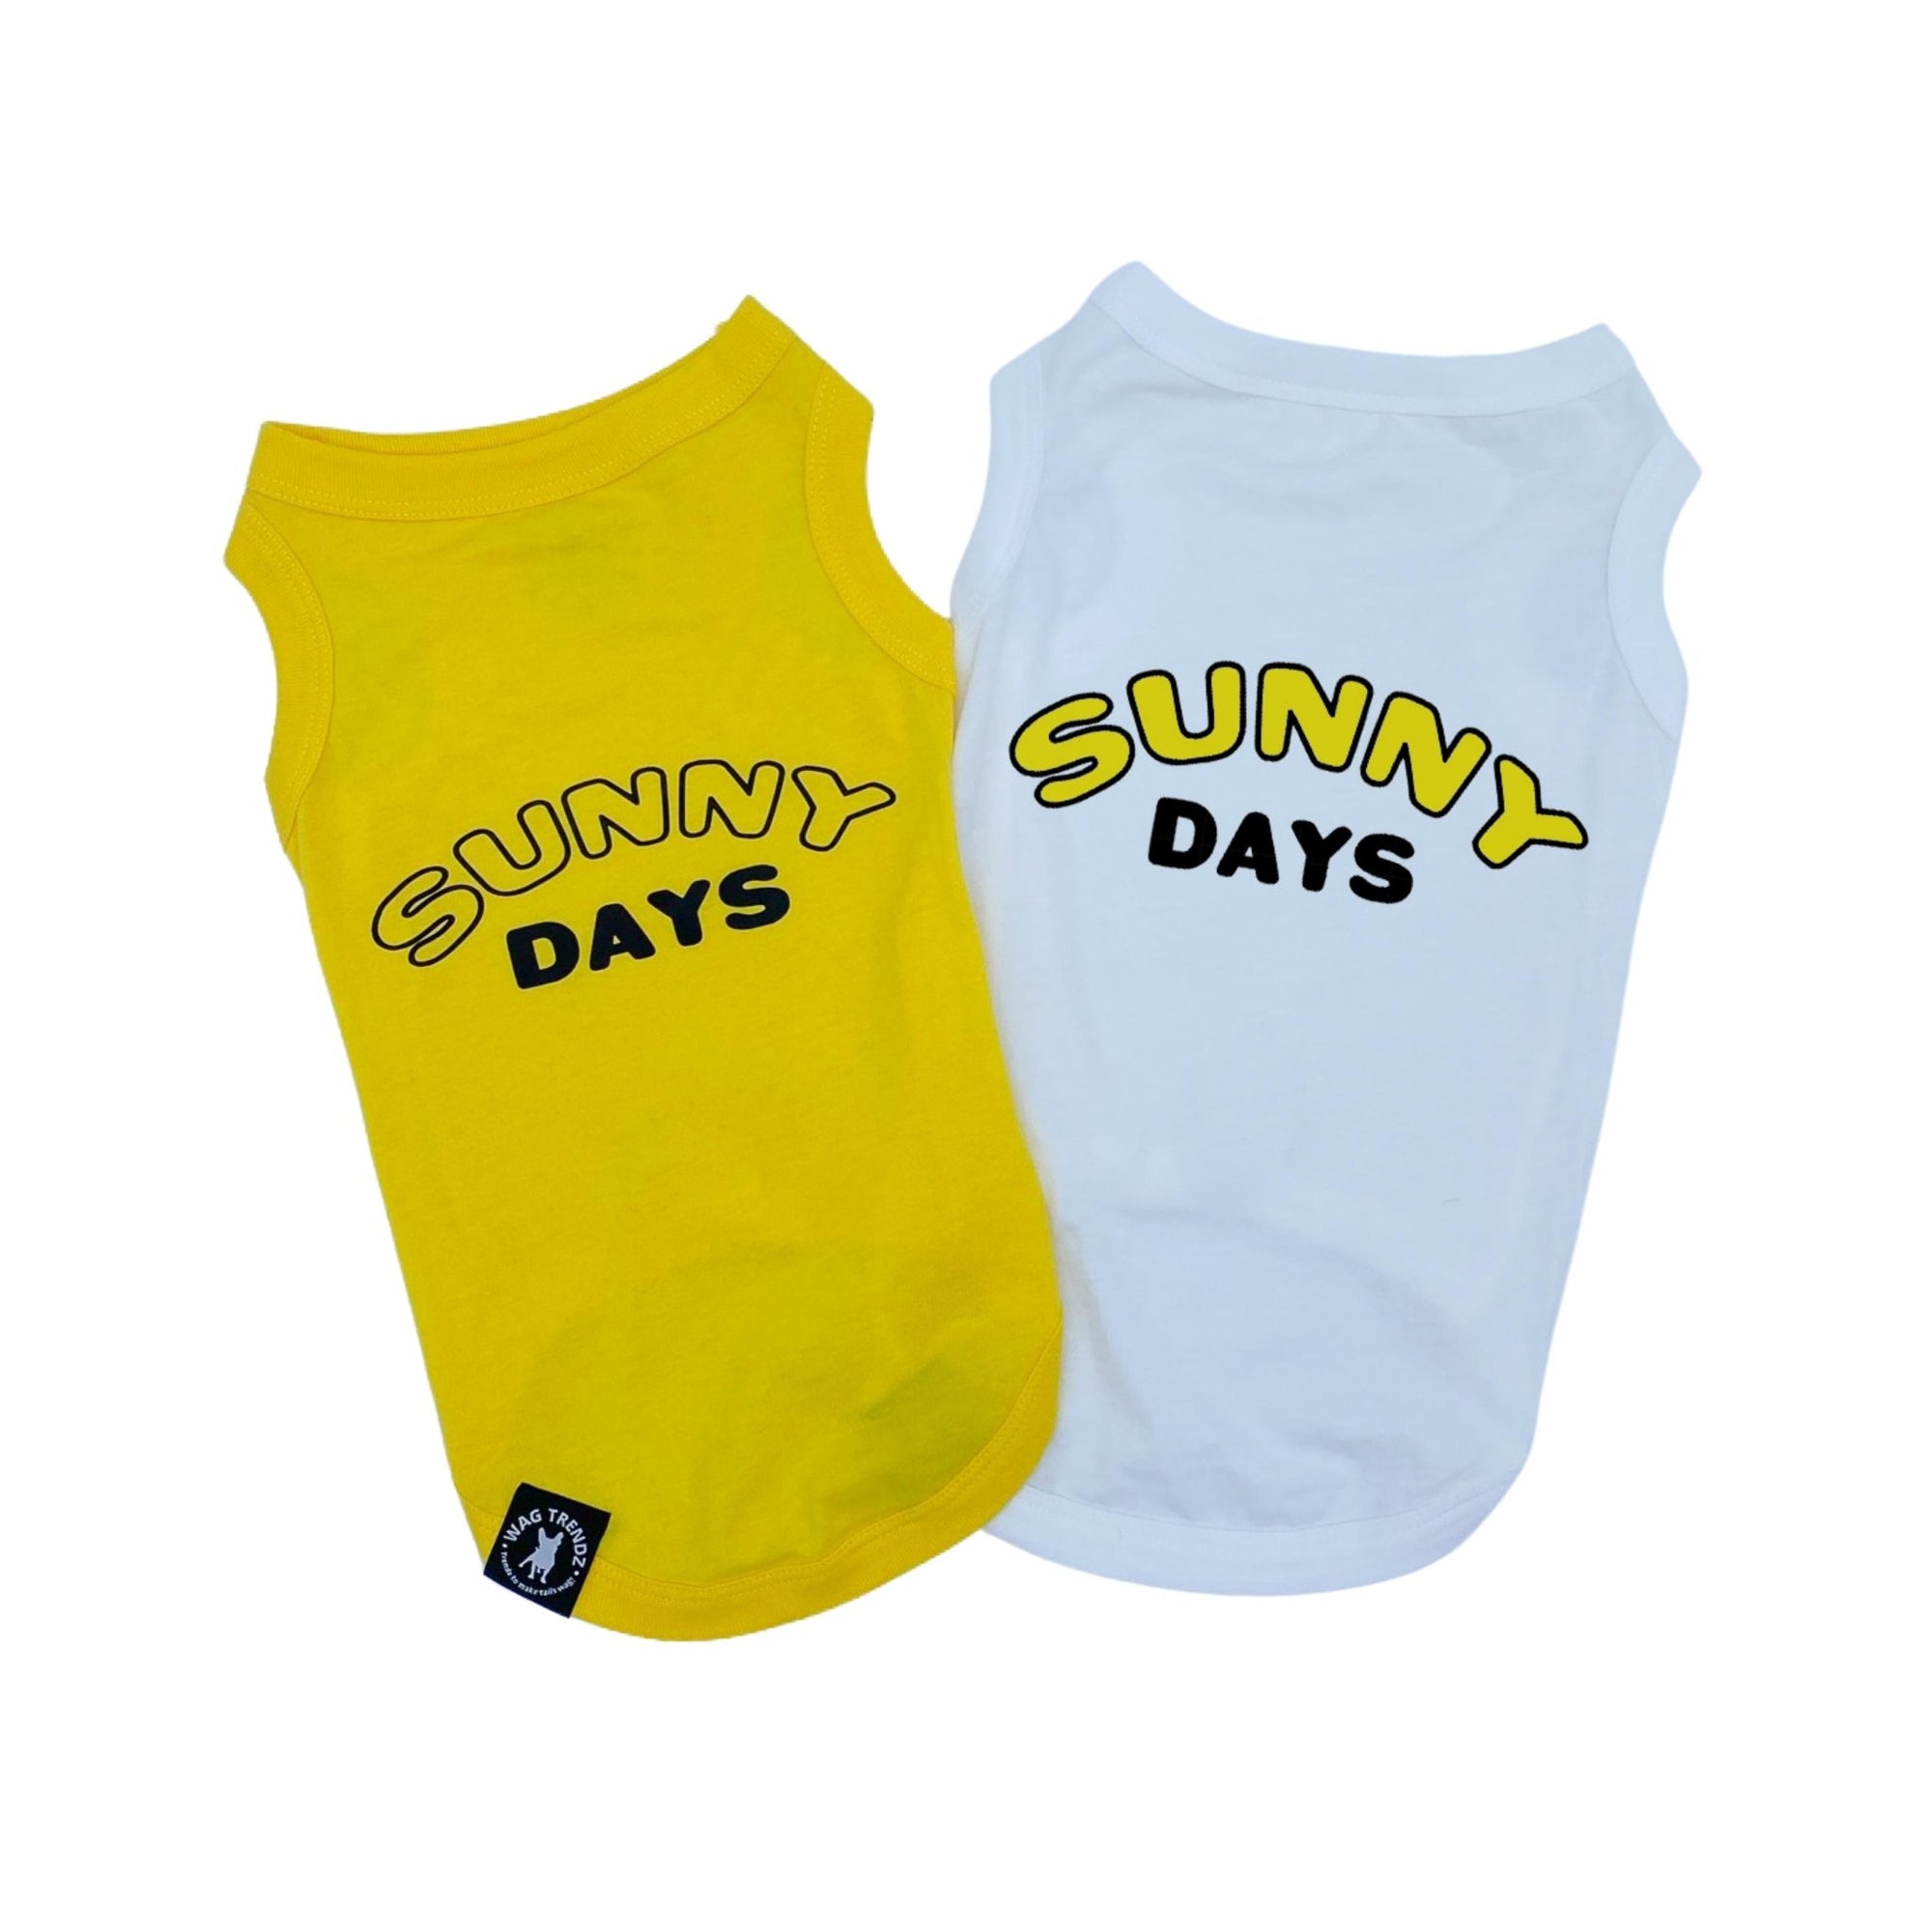 Dog T-Shirt - "Sunny Days" dog t-shirts in Yellow and White - backside says Sunny Days with lettering in yellow and black - against solid white background - Wag Trendz